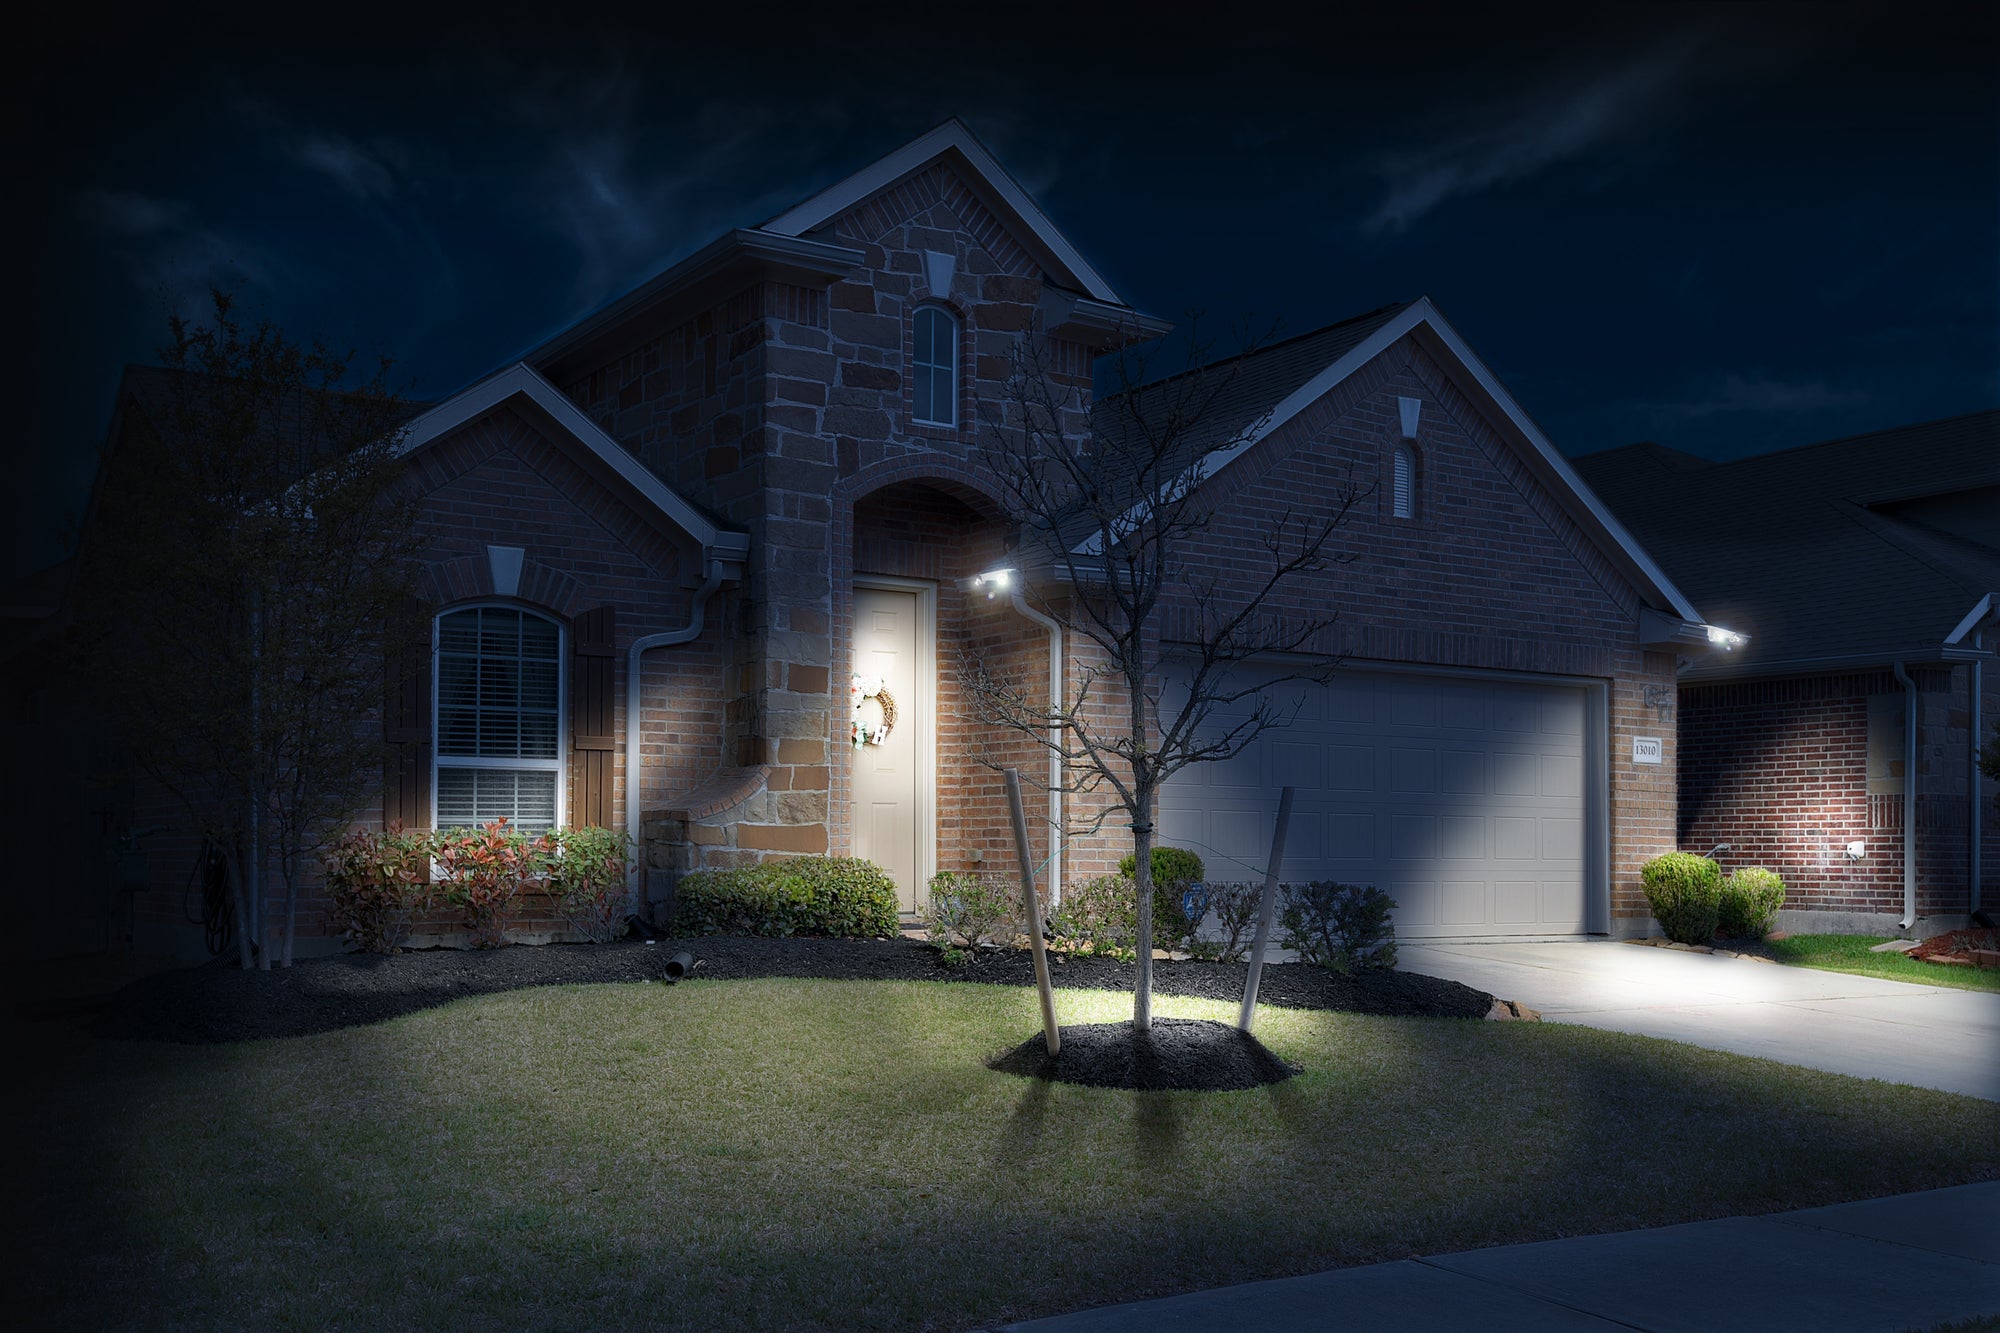 Brick and stone built house shown at night with two EZ Home Security Solar Gutter lights illuminating the front of the house and driveway